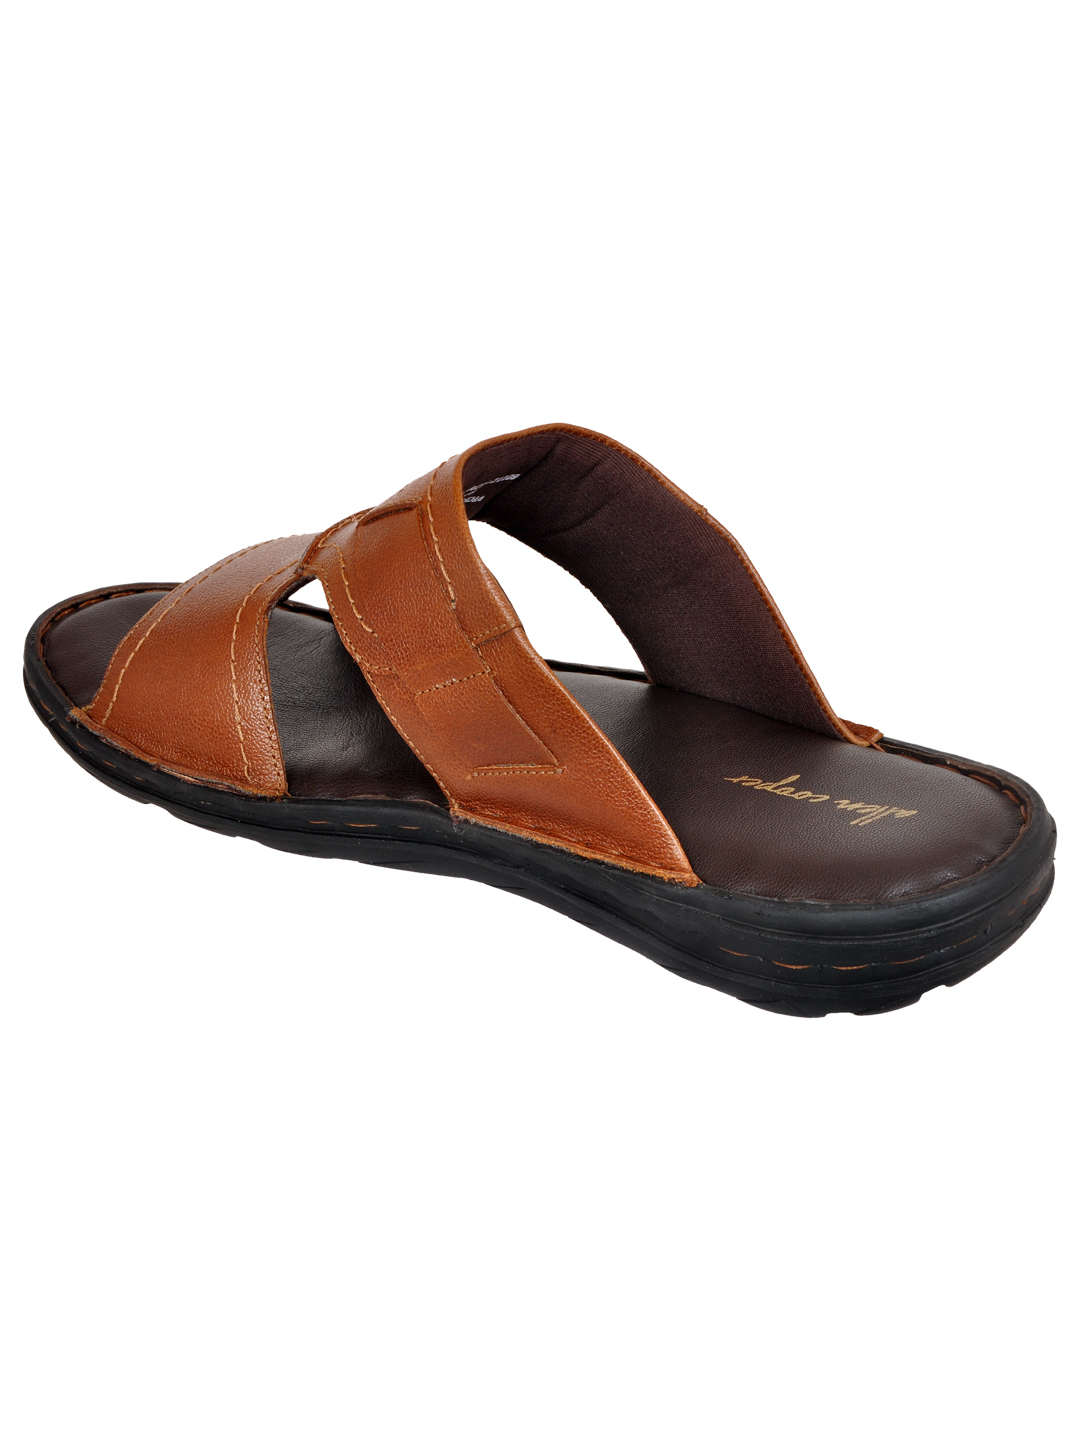 Men's leather Sandals Open Toe - Leather Sandals | Pagonis Greek Sandals-anthinhphatland.vn